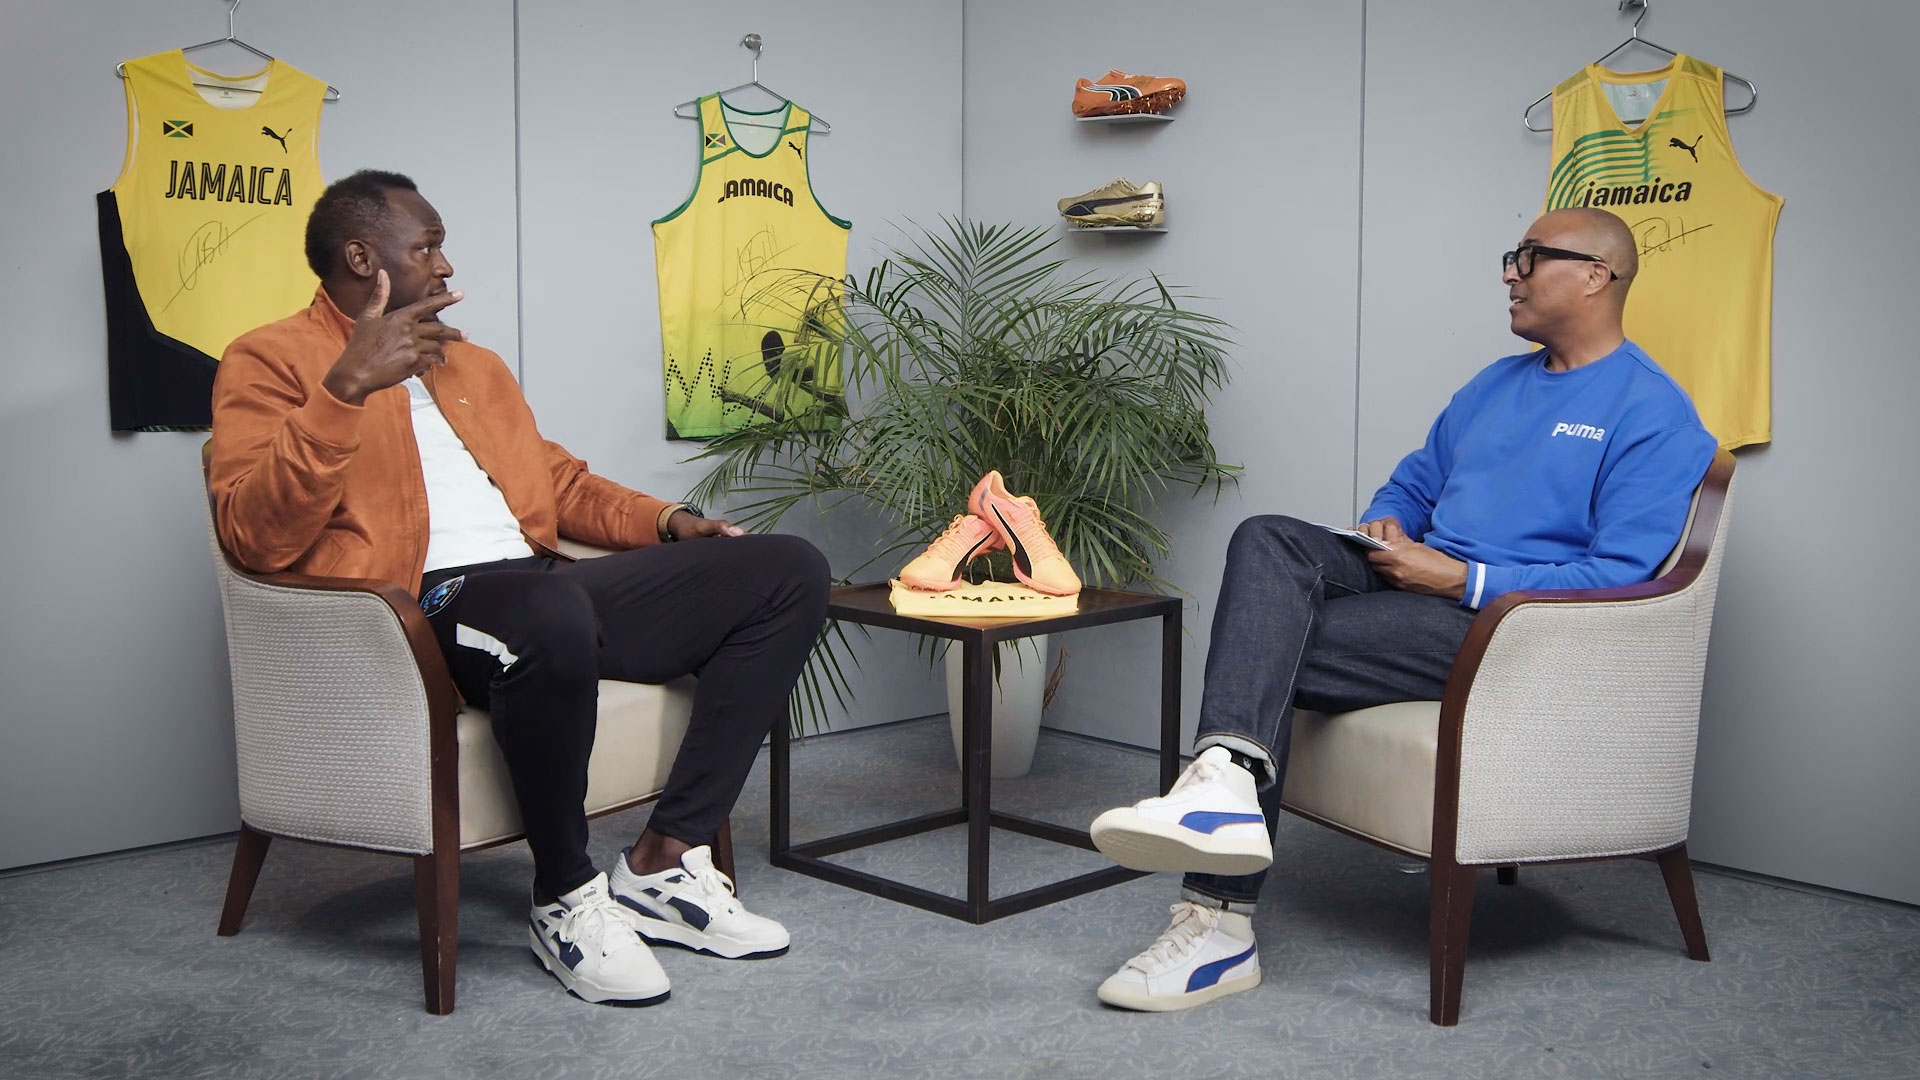 The dynamic conversation between Usain Bolt and Colin Jackson provides an engaging glimpse into the life of a sporting legend. Their discussion on records, partnership, and the thrill of athletics captivated audiences, highlighting Bolt's extraordinary achievements and his passion for the sport.